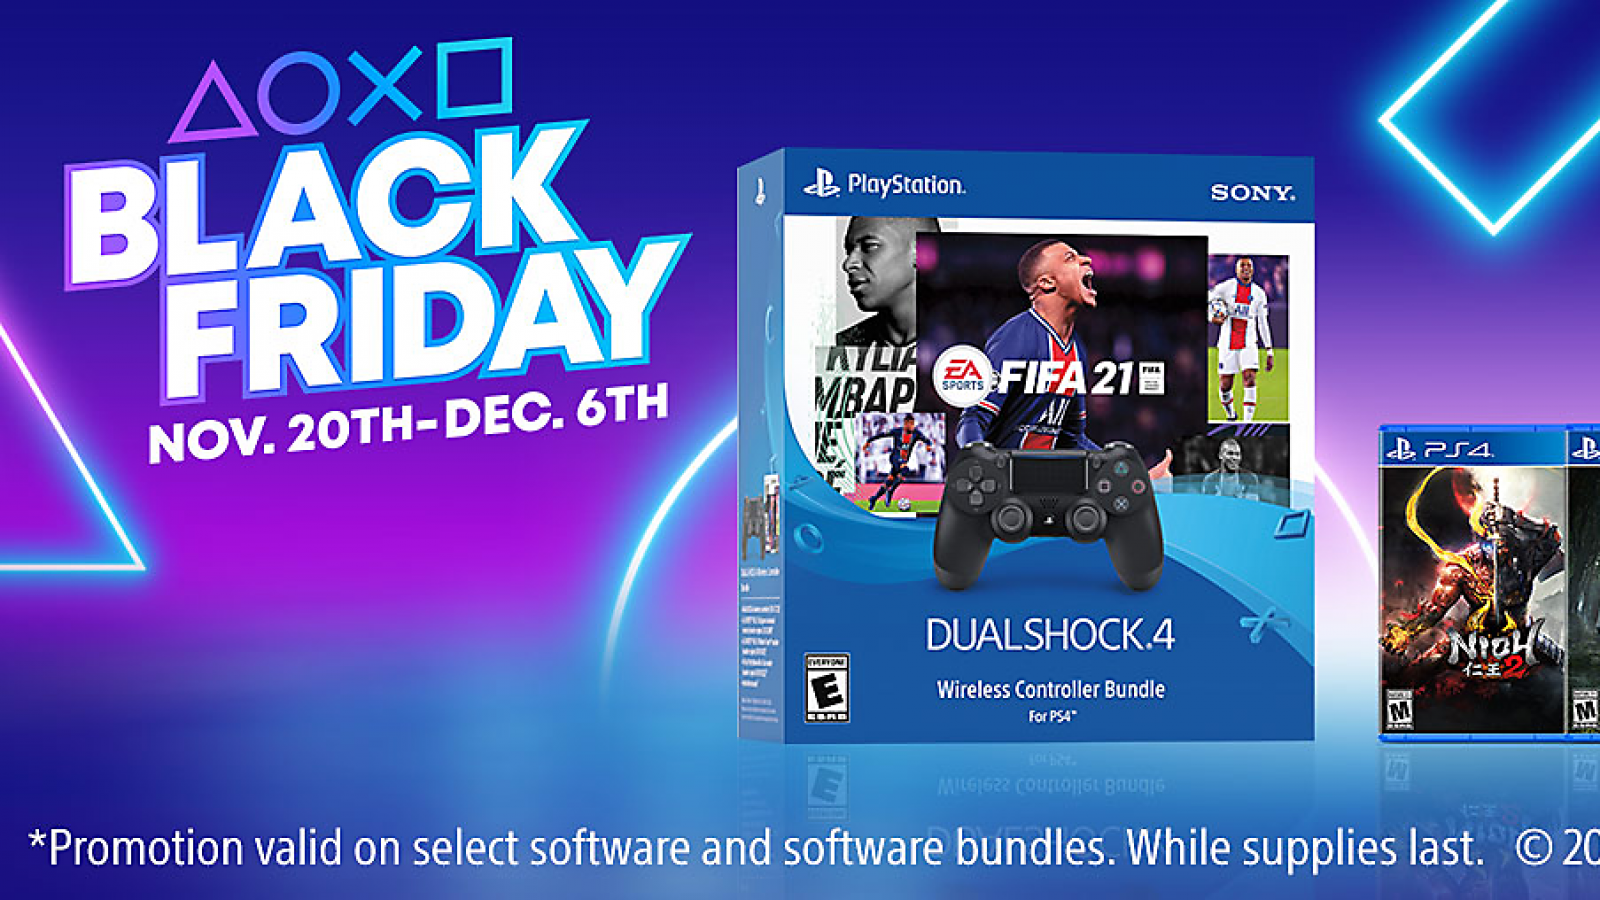 Great Black Friday sale budget games on PlayStation store